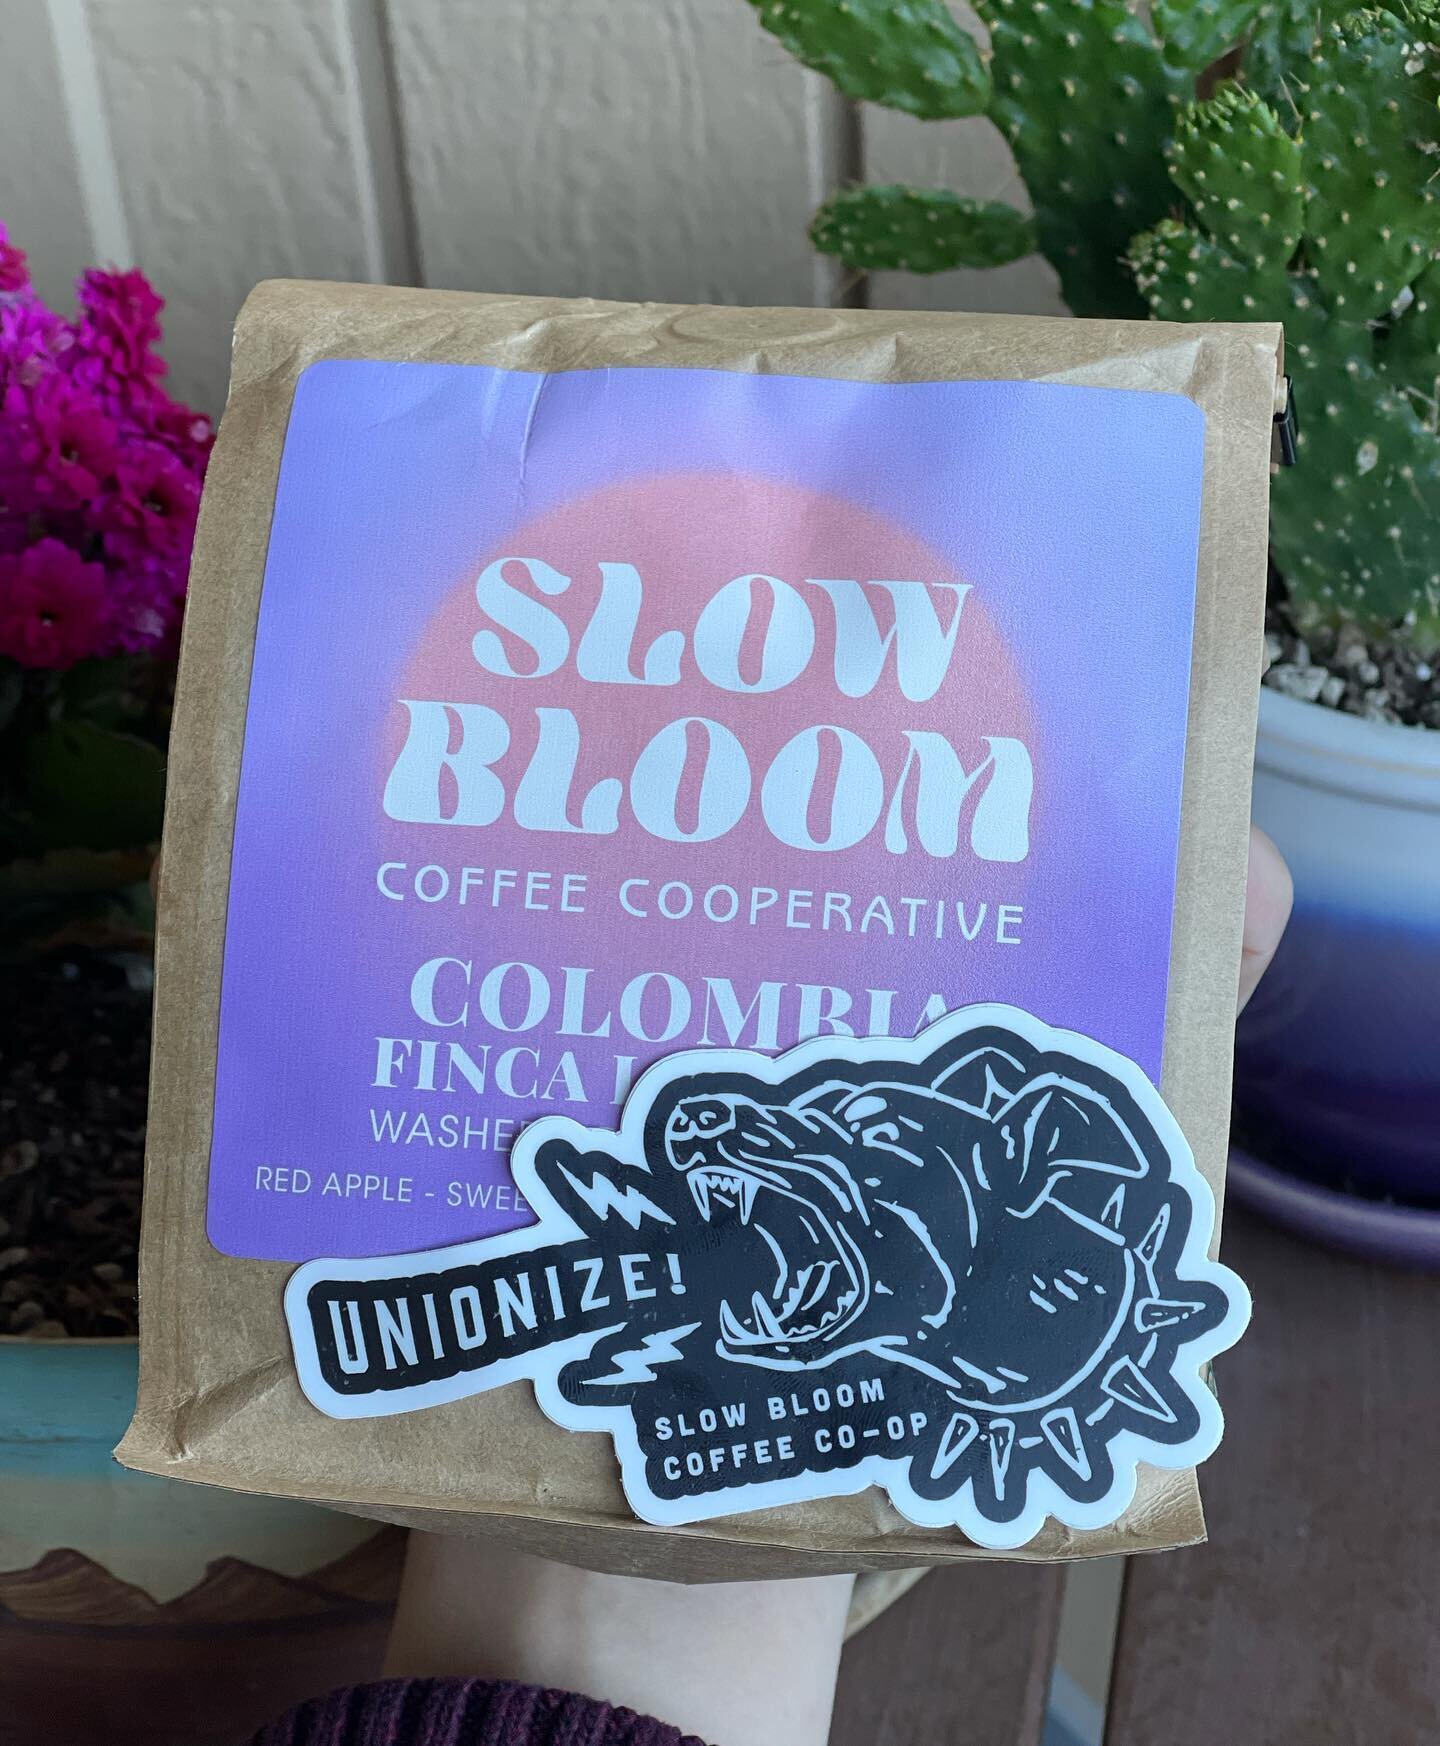 @slowbloomcoffee wants you to know that bosses are off the menu ✌🏼

icymi: after my friends were harassed and fired for unionizing, they continued to lobby for their labor, drove their former company out of business, and then started their own worke